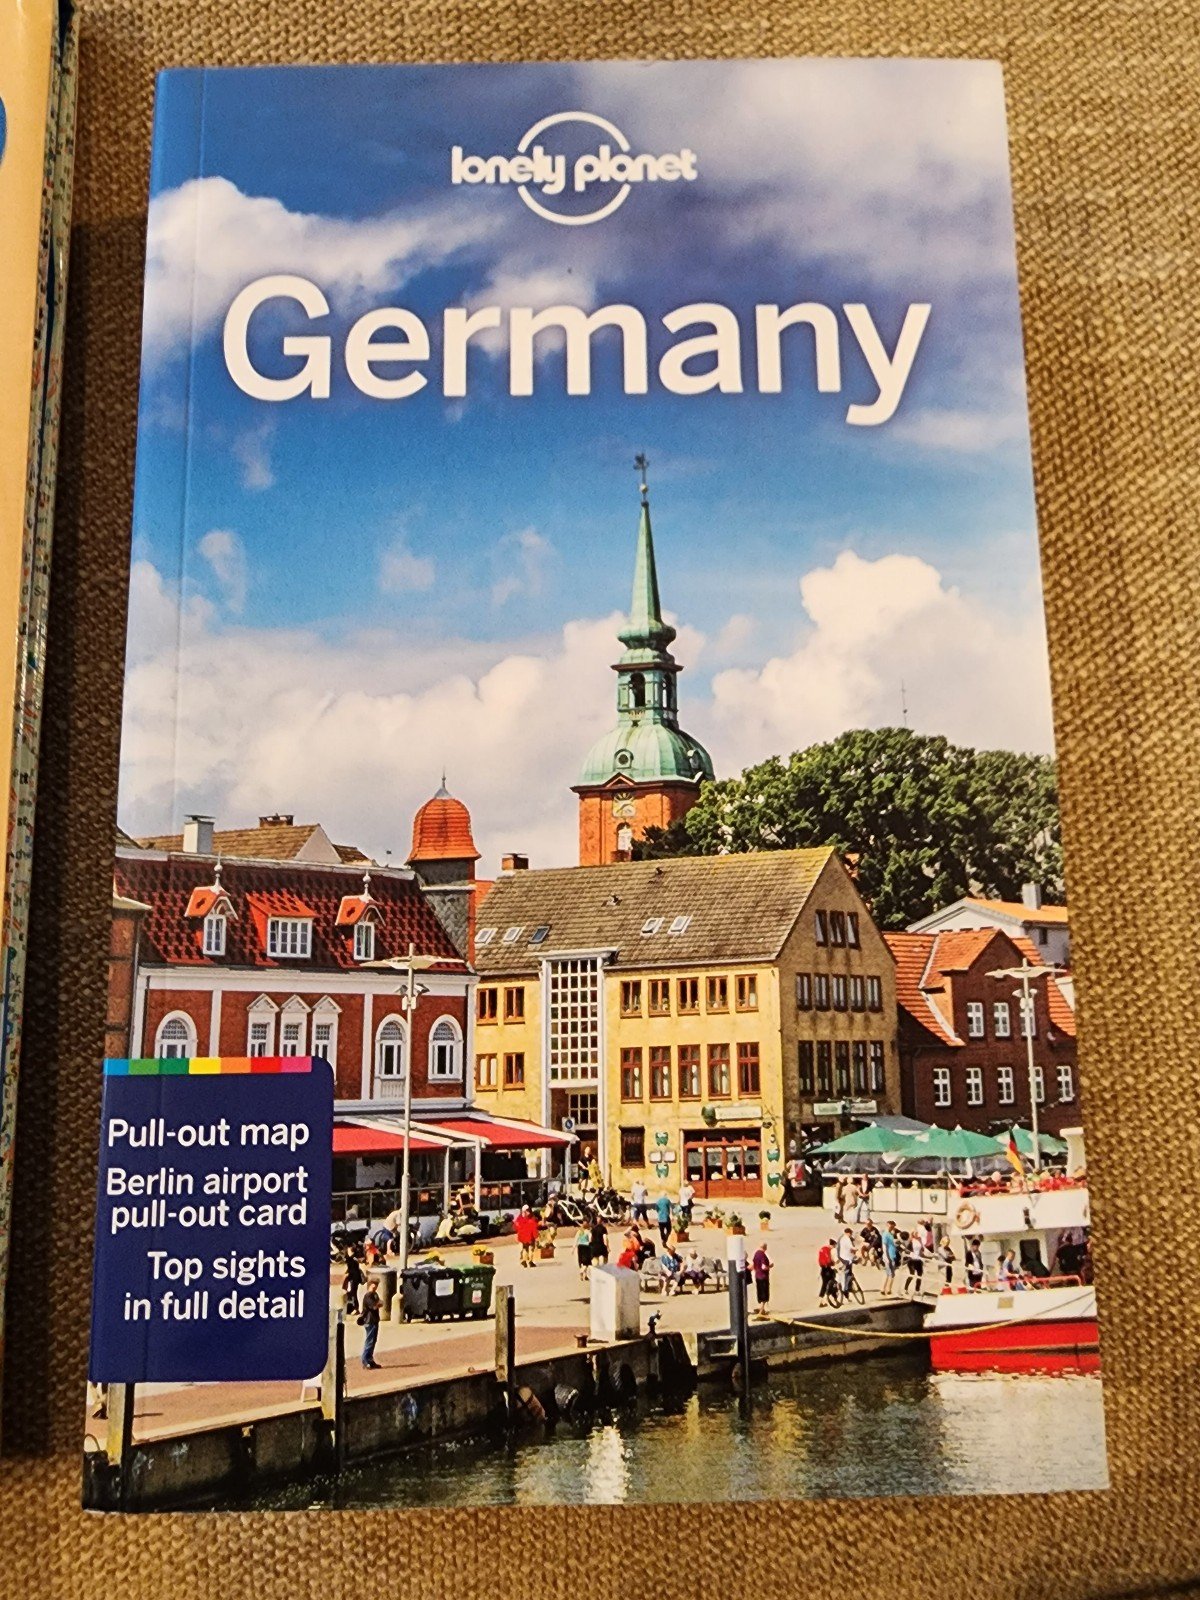 Lonely Planet Travel Book Germany and Borch Map LVM2sDKYb